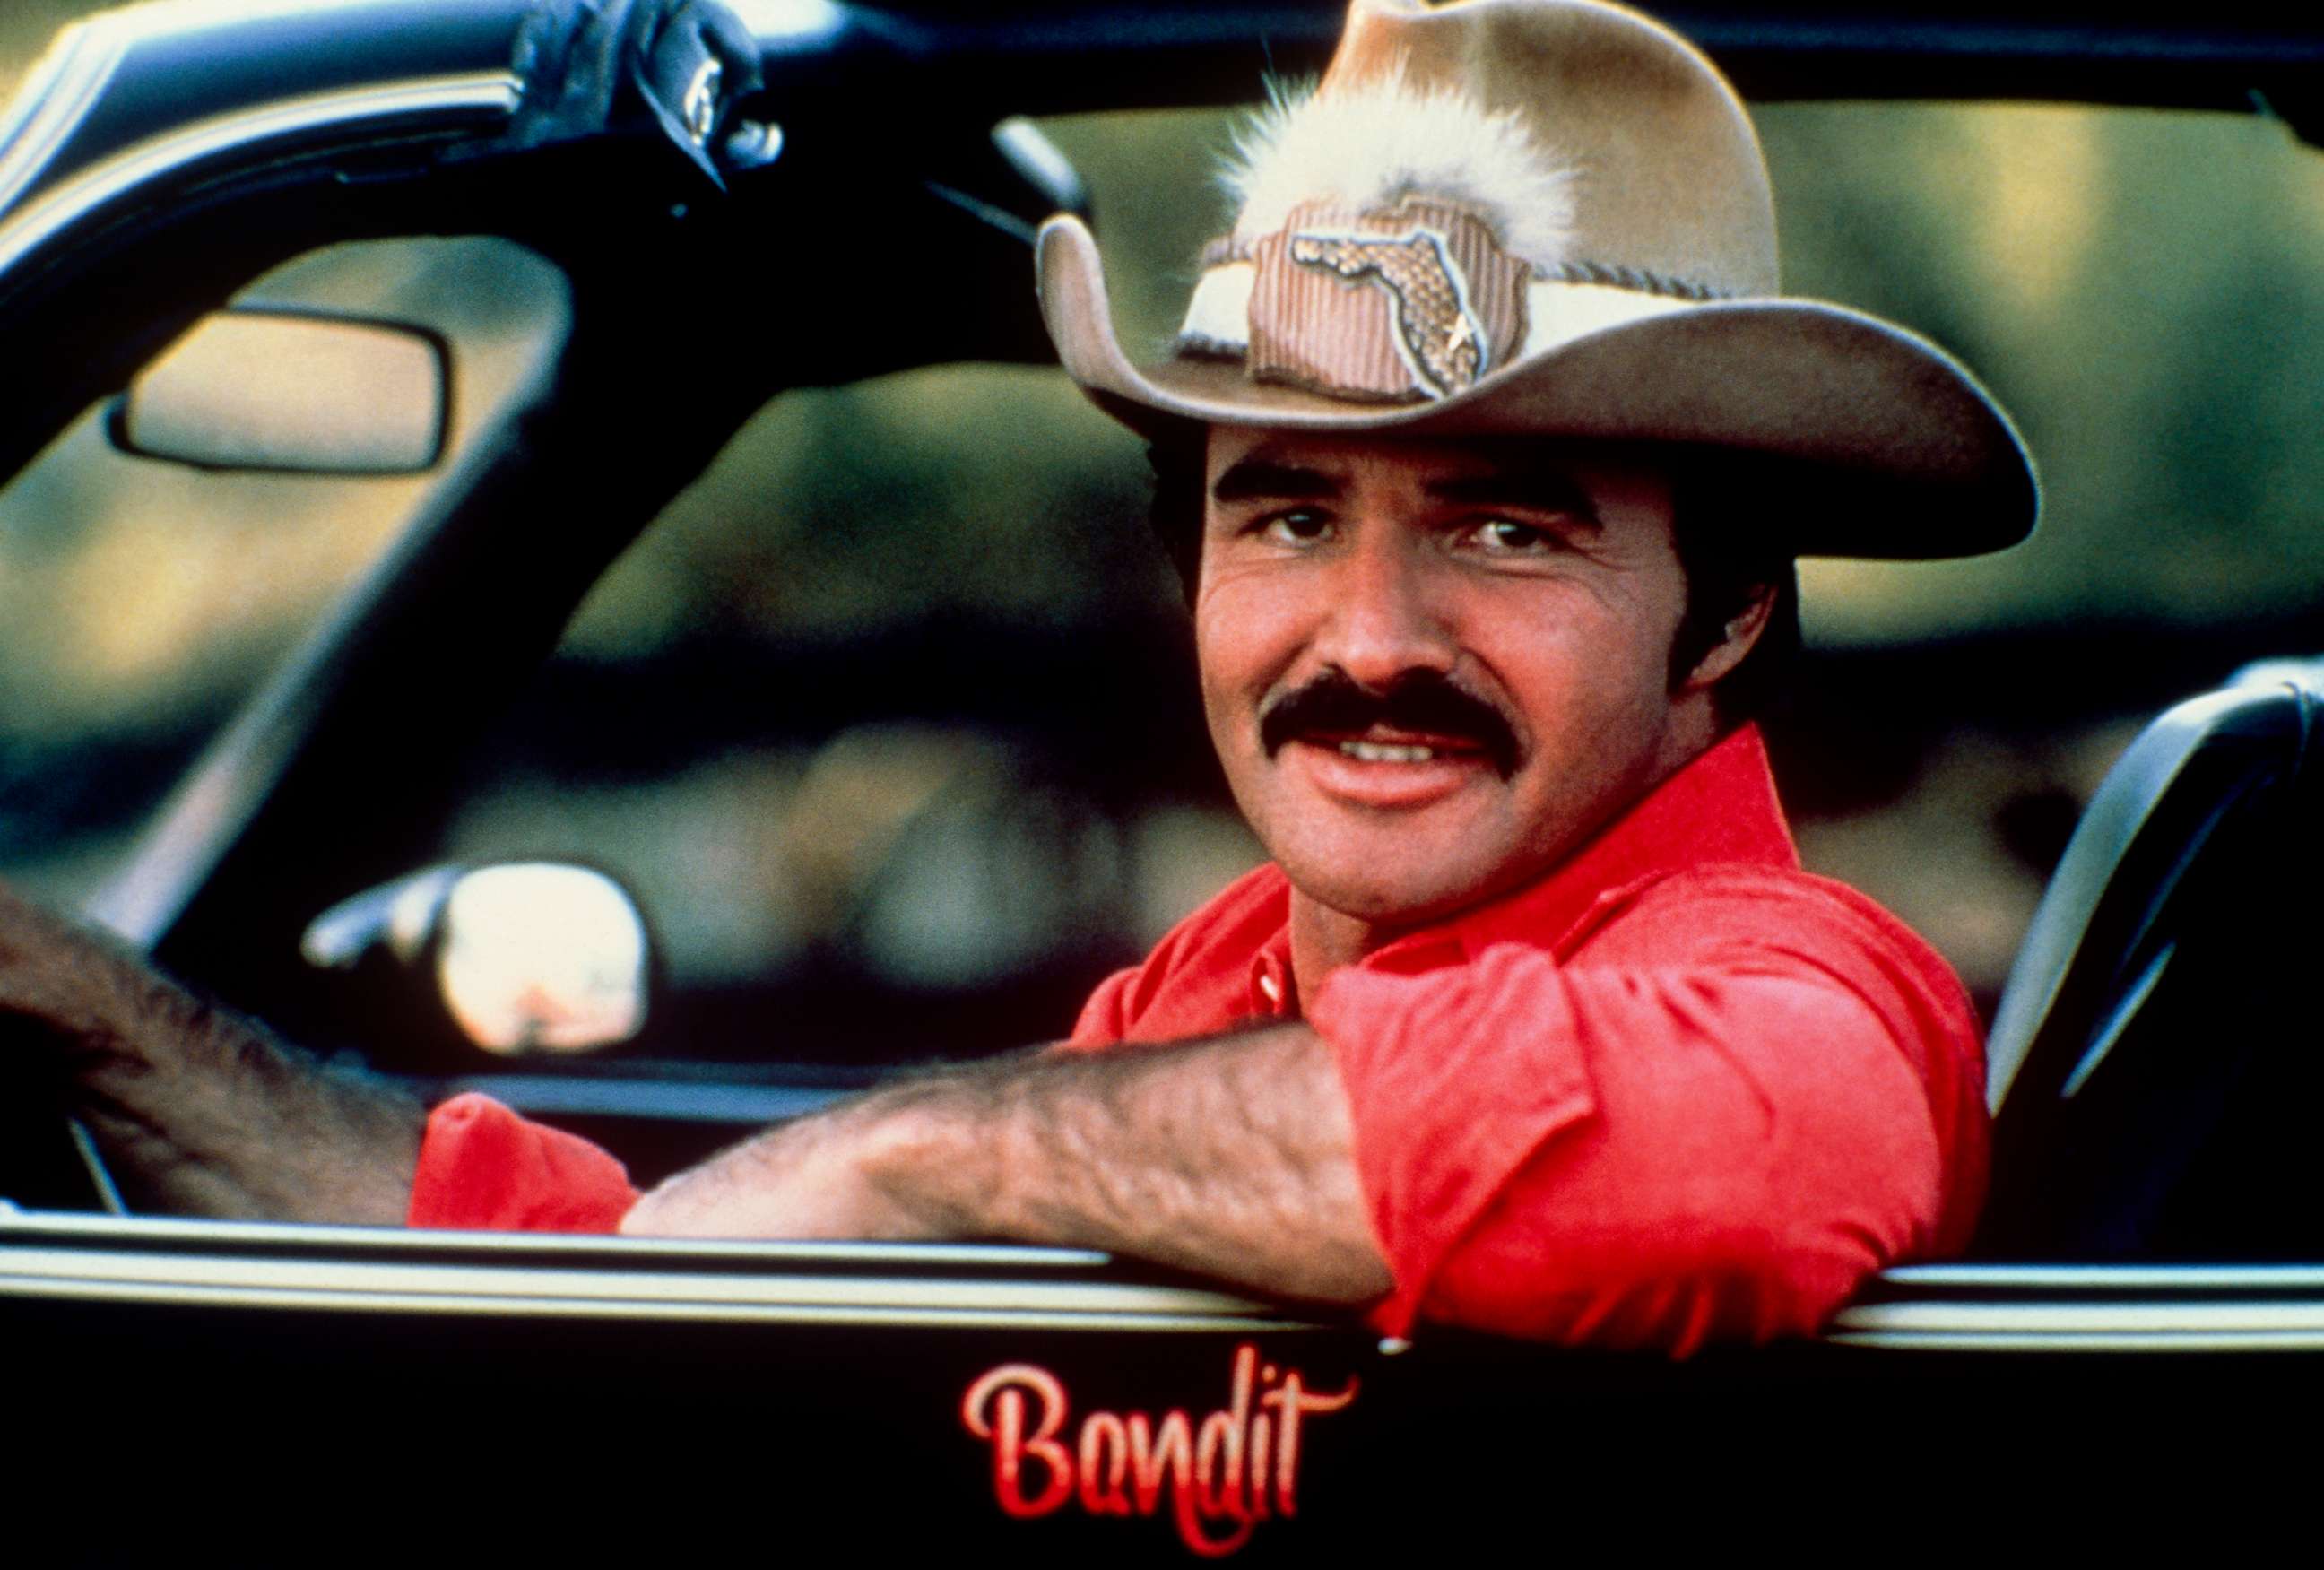 PHOTO: Burt Reynolds in the car from Smoky and the Bandit in 1970 in N.Y.